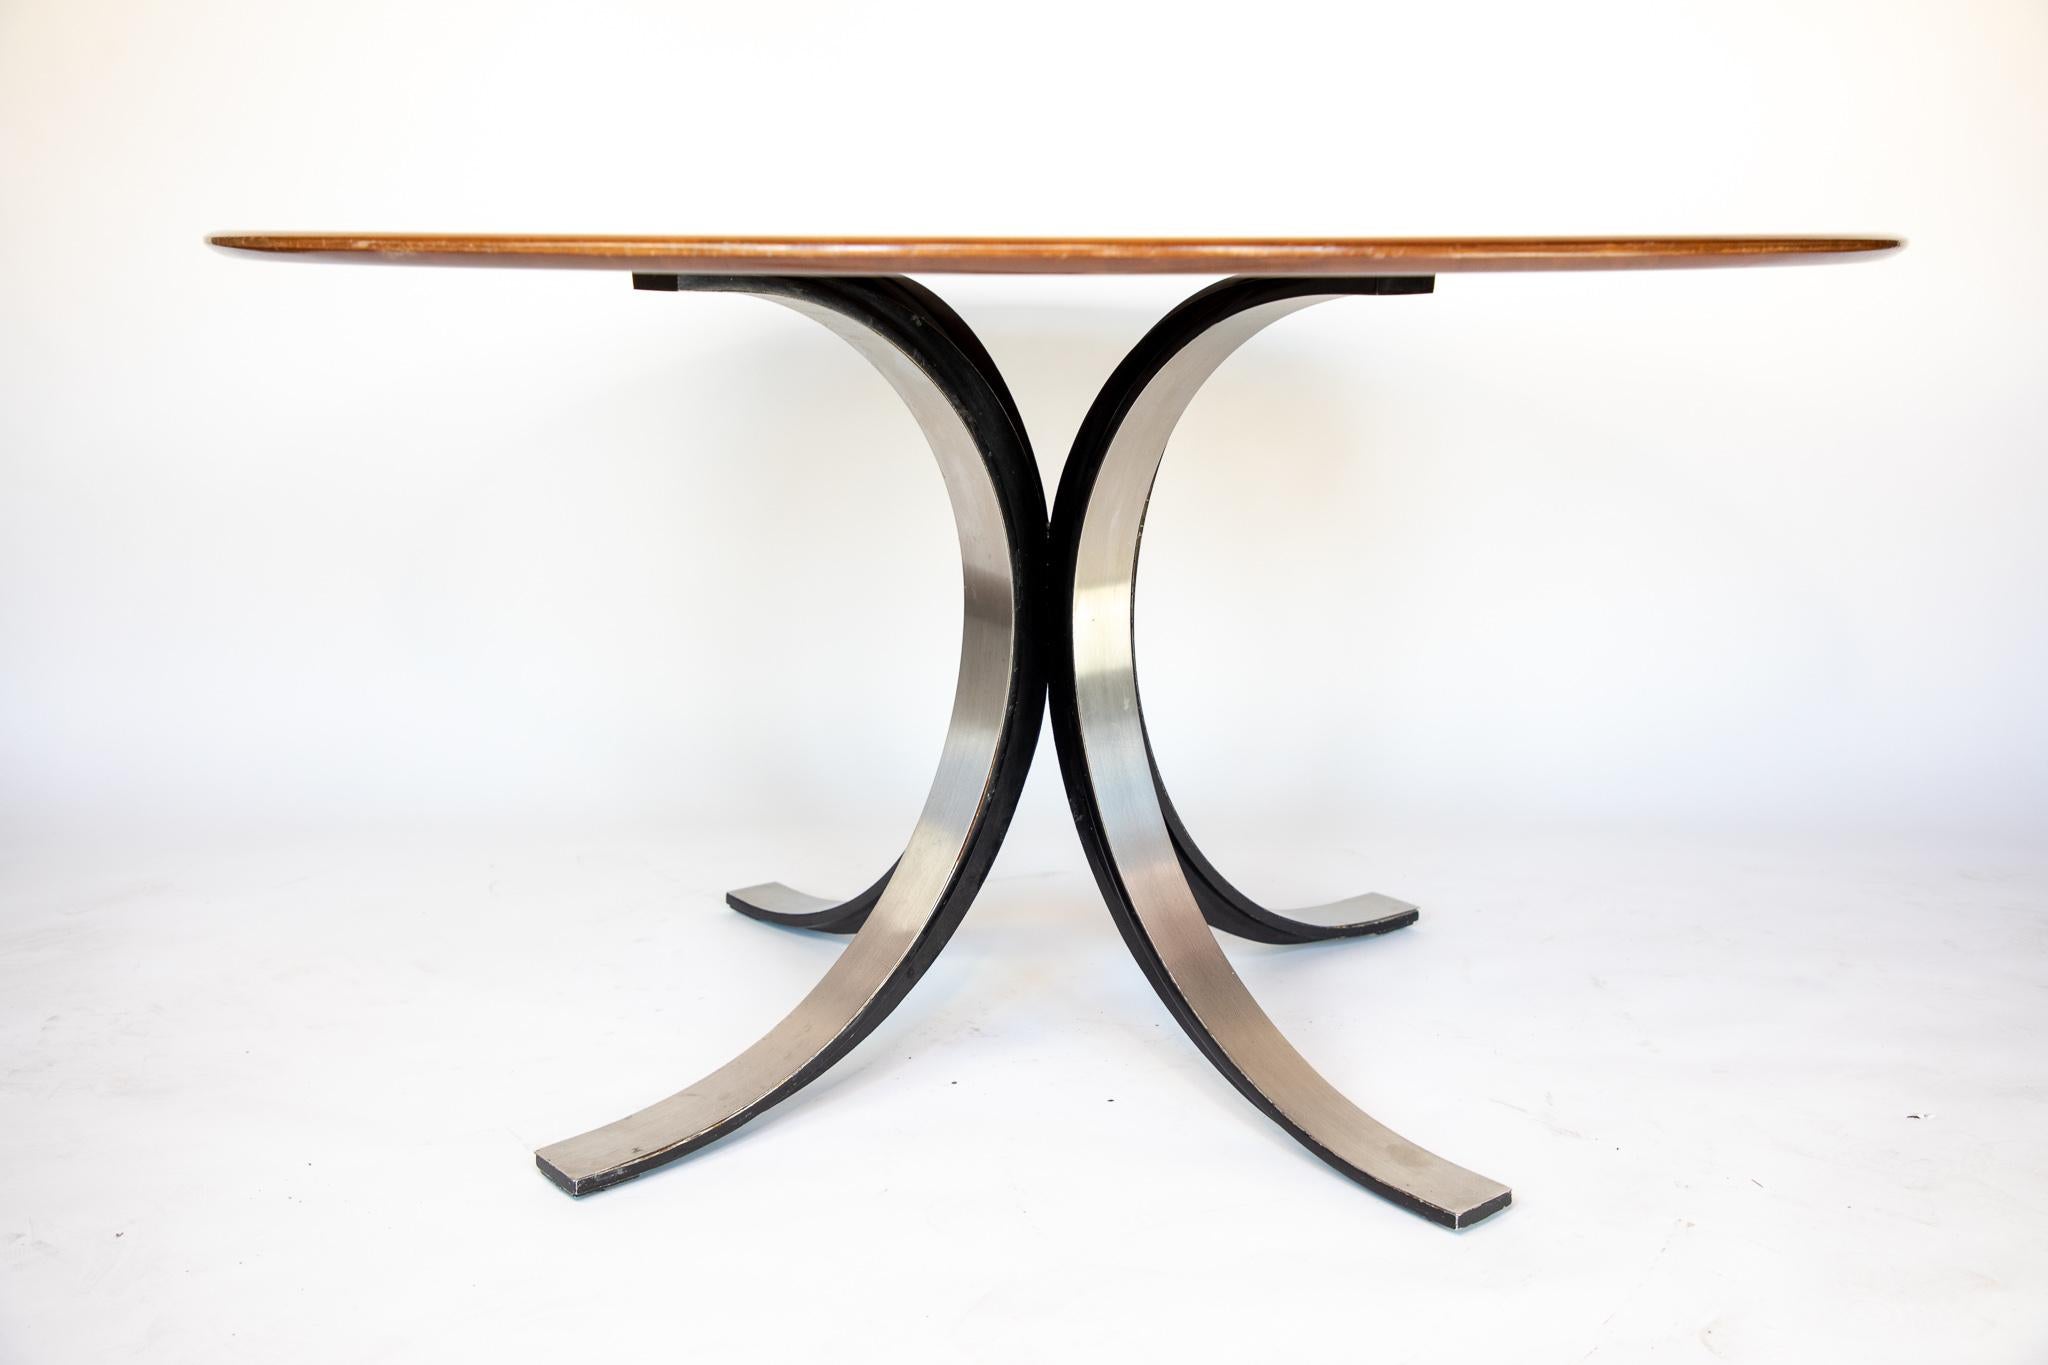 Lounge or Dining Table T69 by Osvaldo Borsani for Tecno, Rosewood, Italy 1960s.

This iconic mid-century Italian dining or lounge table named 